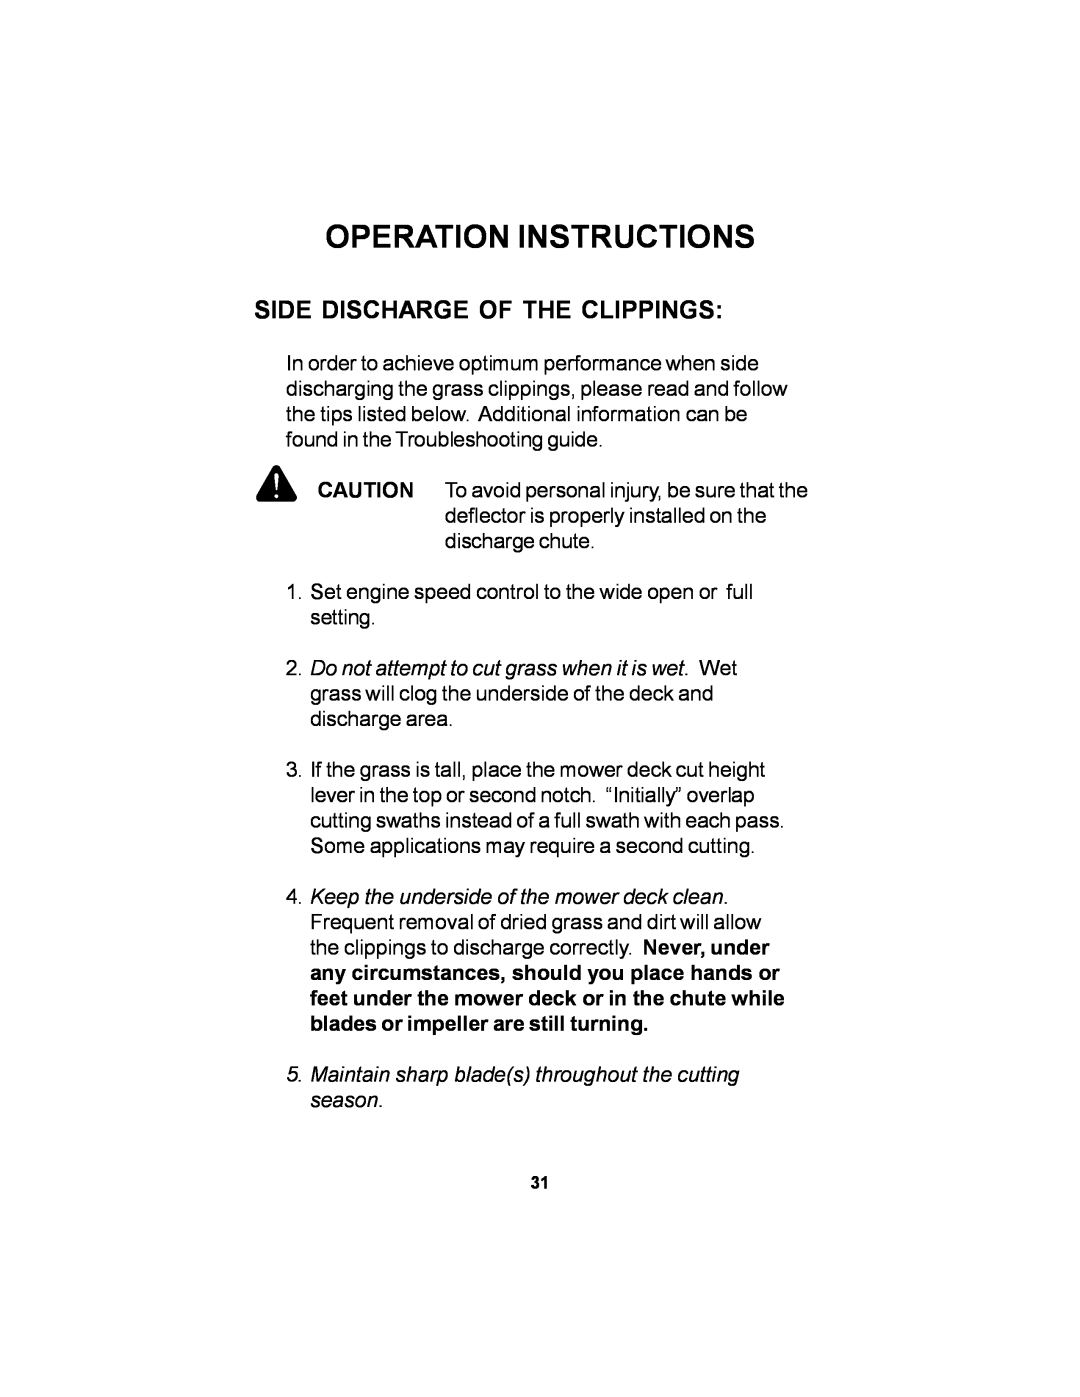 Dixon 11249-106 manual Side Discharge Of The Clippings, Operation Instructions 